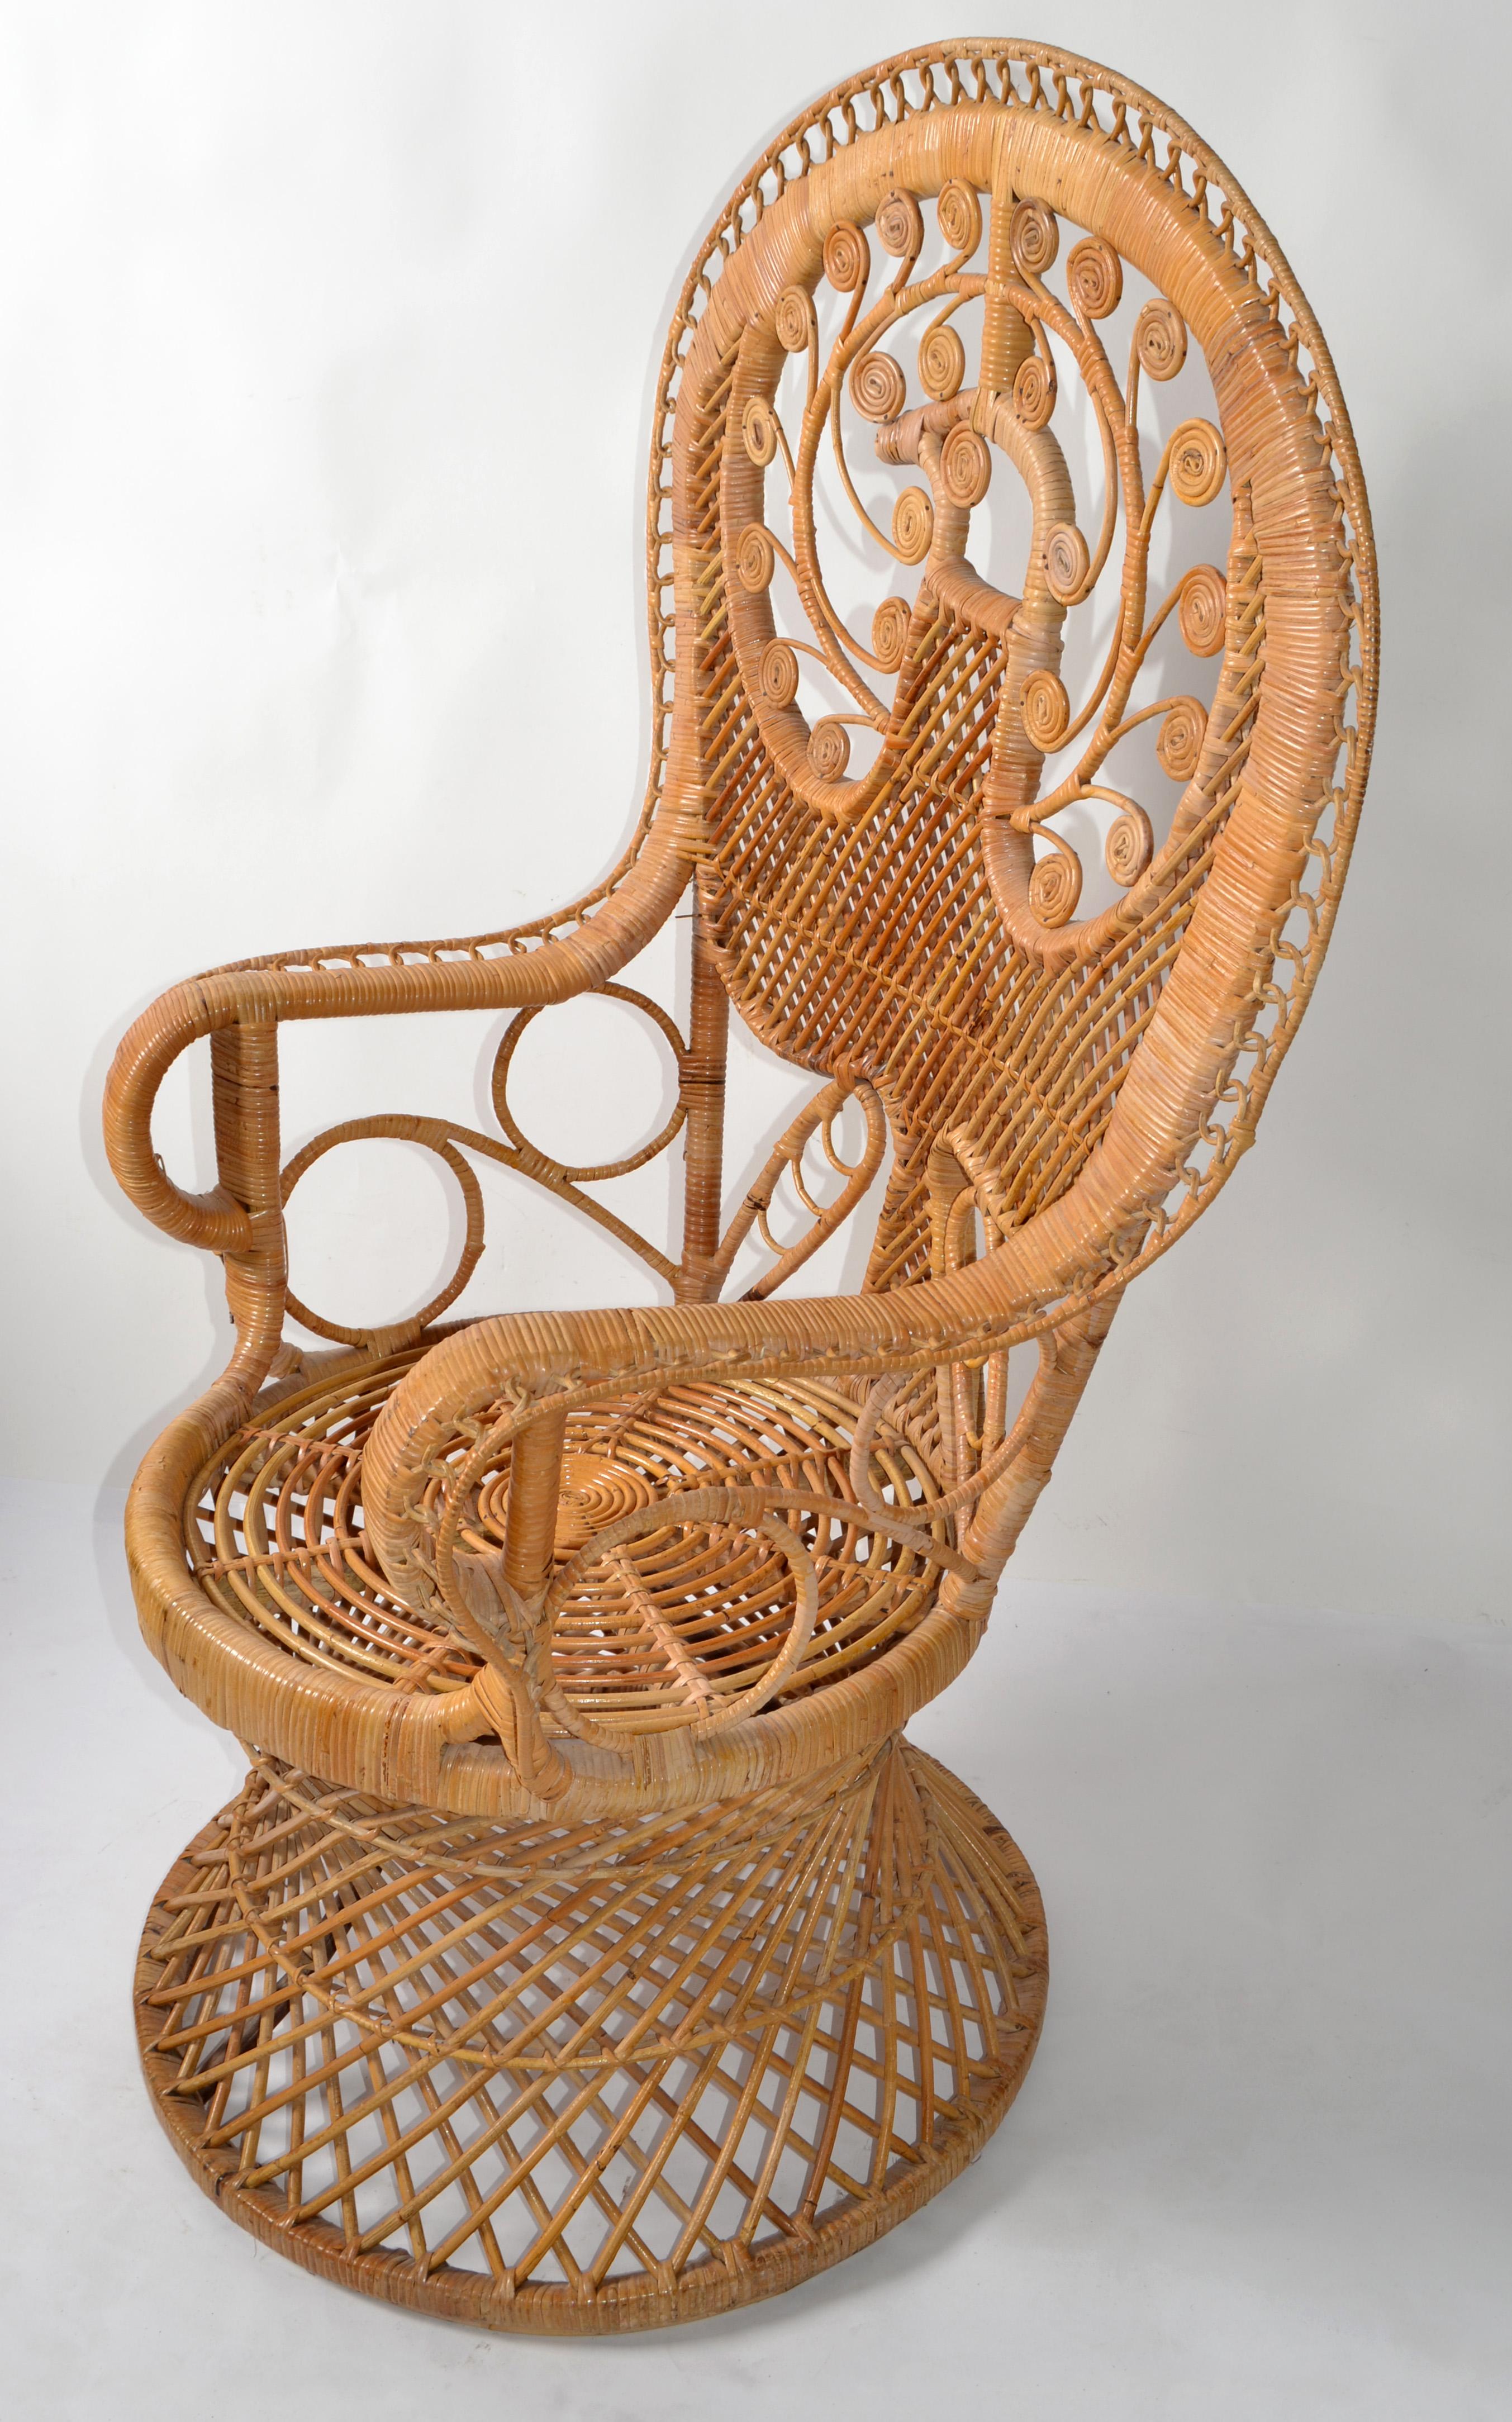 Set of Coastal Vintage Round Rattan Accent Glass Table with Hand-Woven Wicker Caning Peacock Throne Chair.
Meticulous detailed vintage woven rattan Peacock High back Armchair that will look fabulous indoors or outdoors.
The Duo features a Bohemian